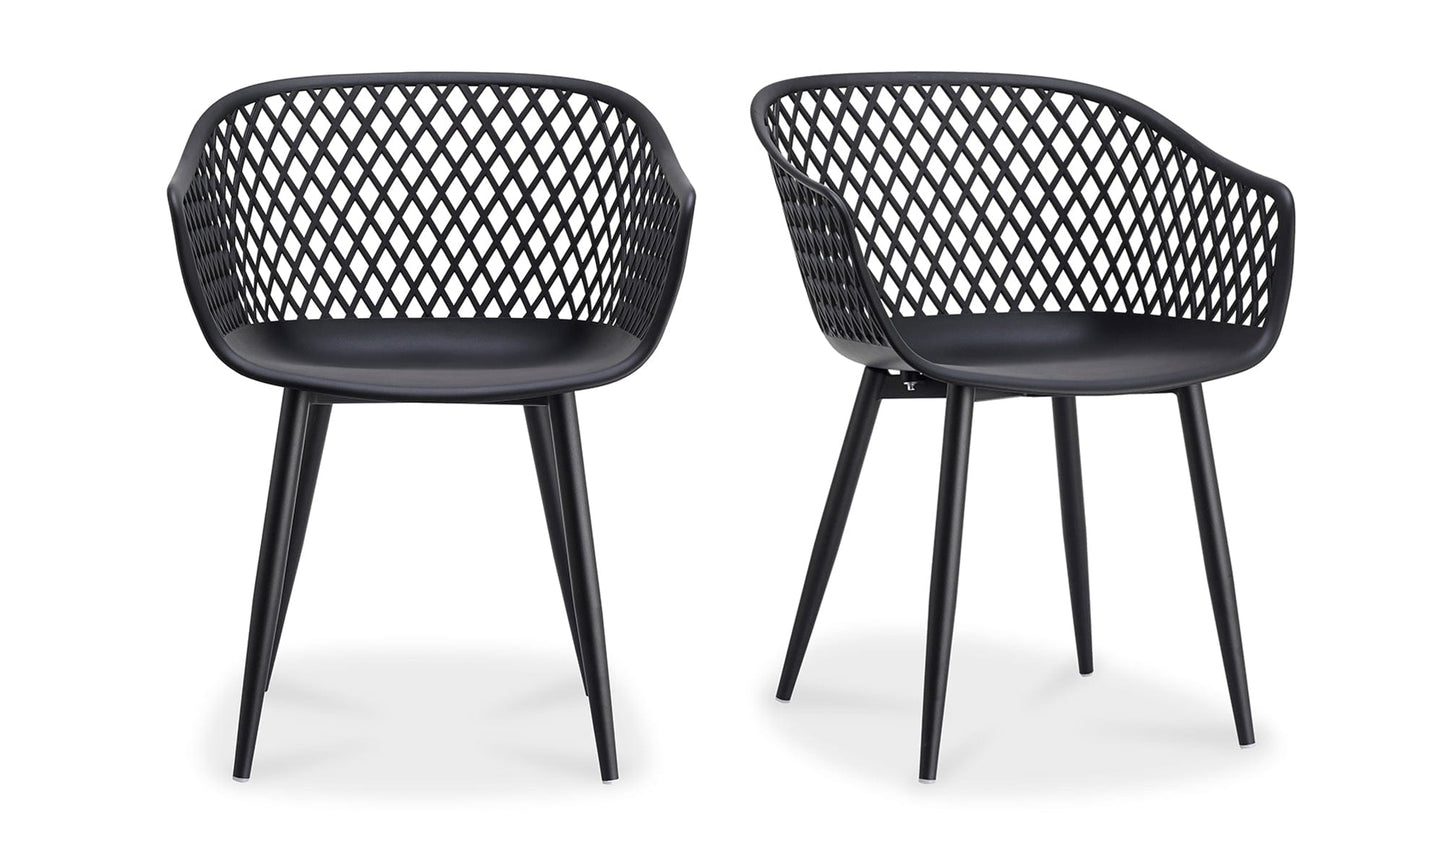 Moe's Black PIAZZA OUTDOOR CHAIR - SET OF TWO